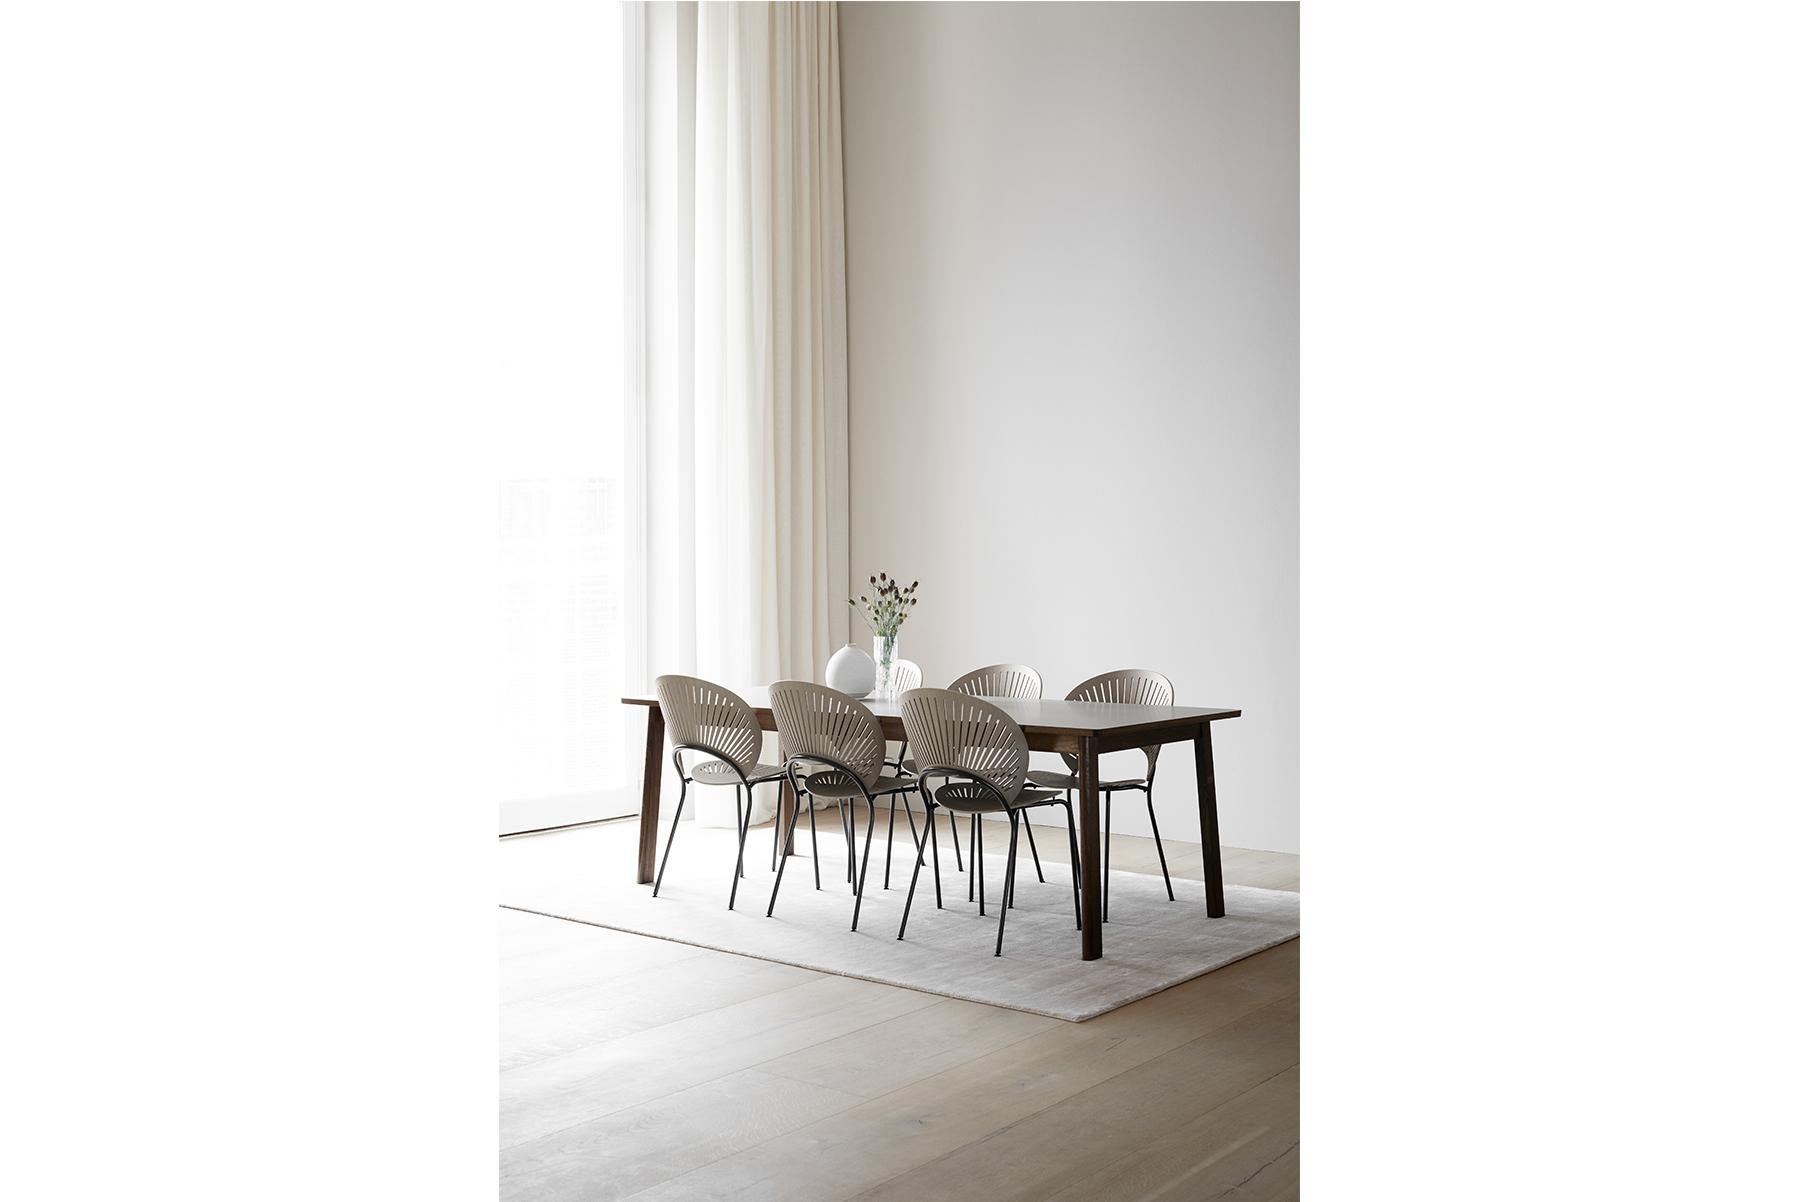 Arde Ana is a new dining table with butterfly extension that unites timeless design, superb craftsmanship and agile functionality; making it the perfect choice for a multitude of uses – from family gatherings to business meetings.